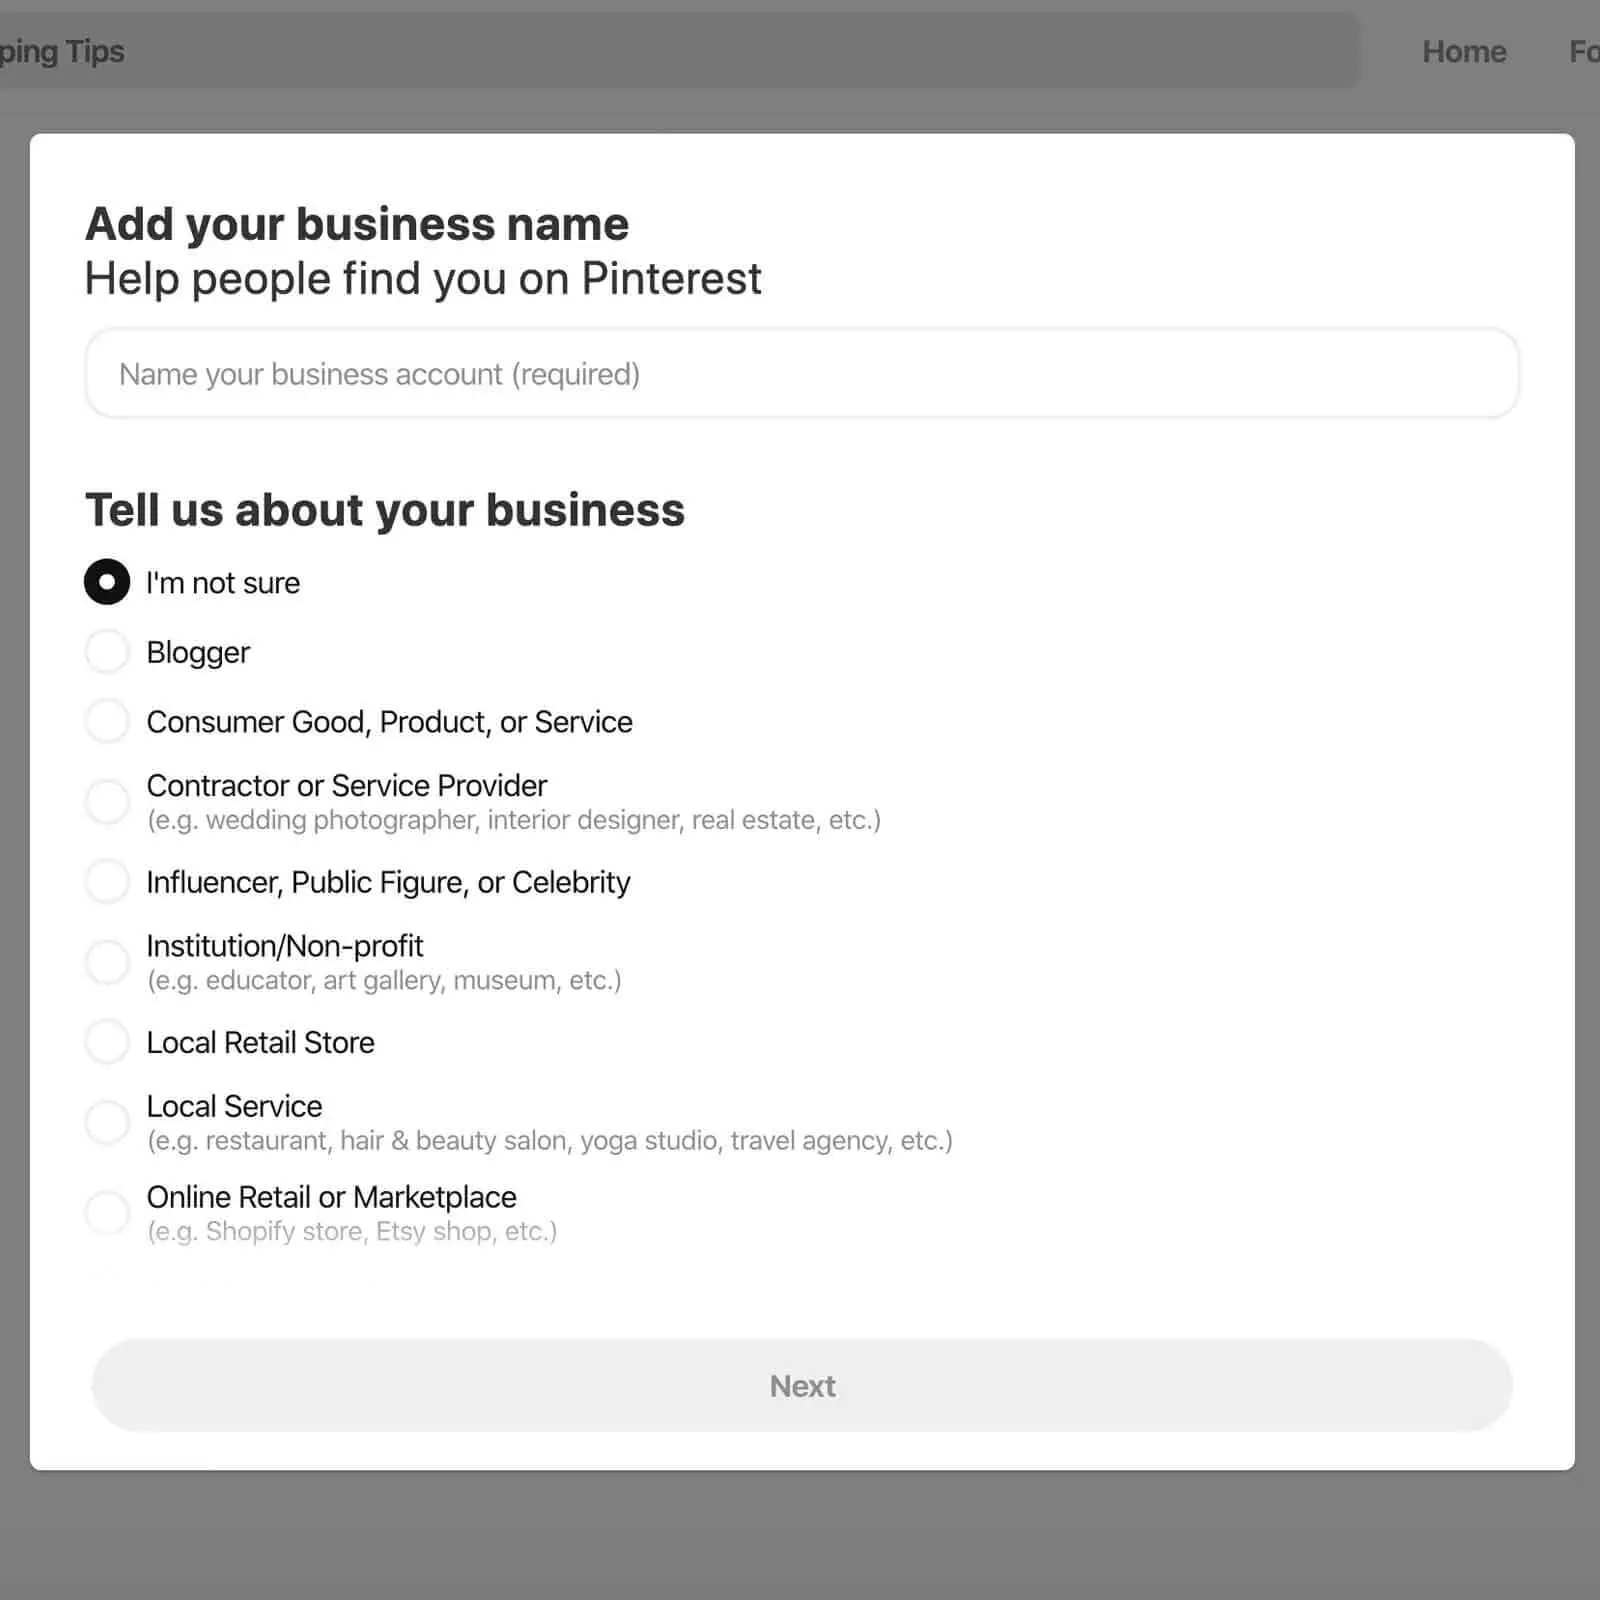 Screenshot of the Pinterest business account creation workflow.